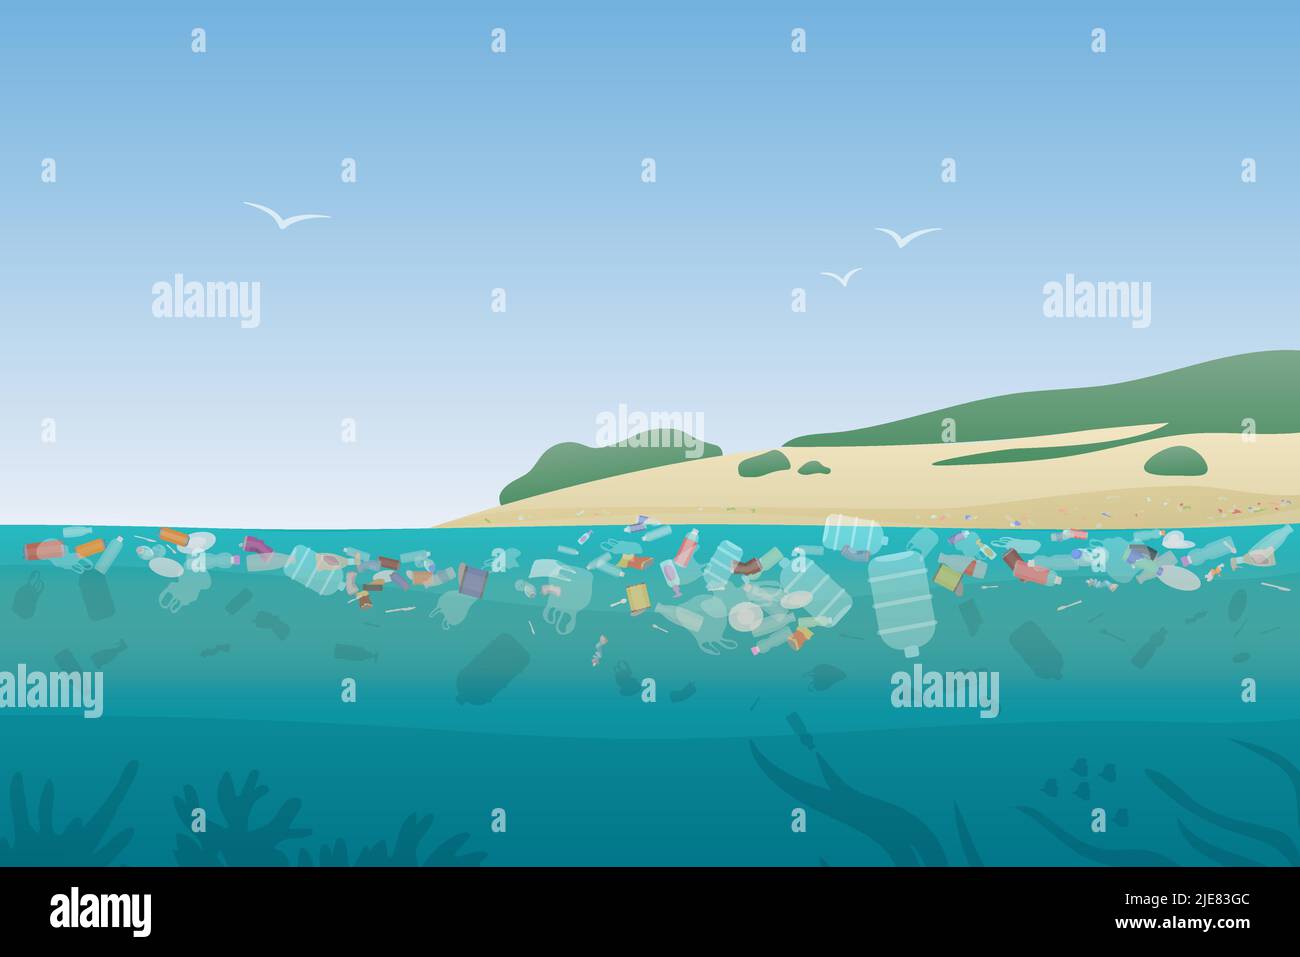 Polluted seaside with trash and plastic garbage vector illustration. Cartoon dirty coastal landscape with floating bottles, bags, pile of debris rubbish background. Littering, pollution concept Stock Vector